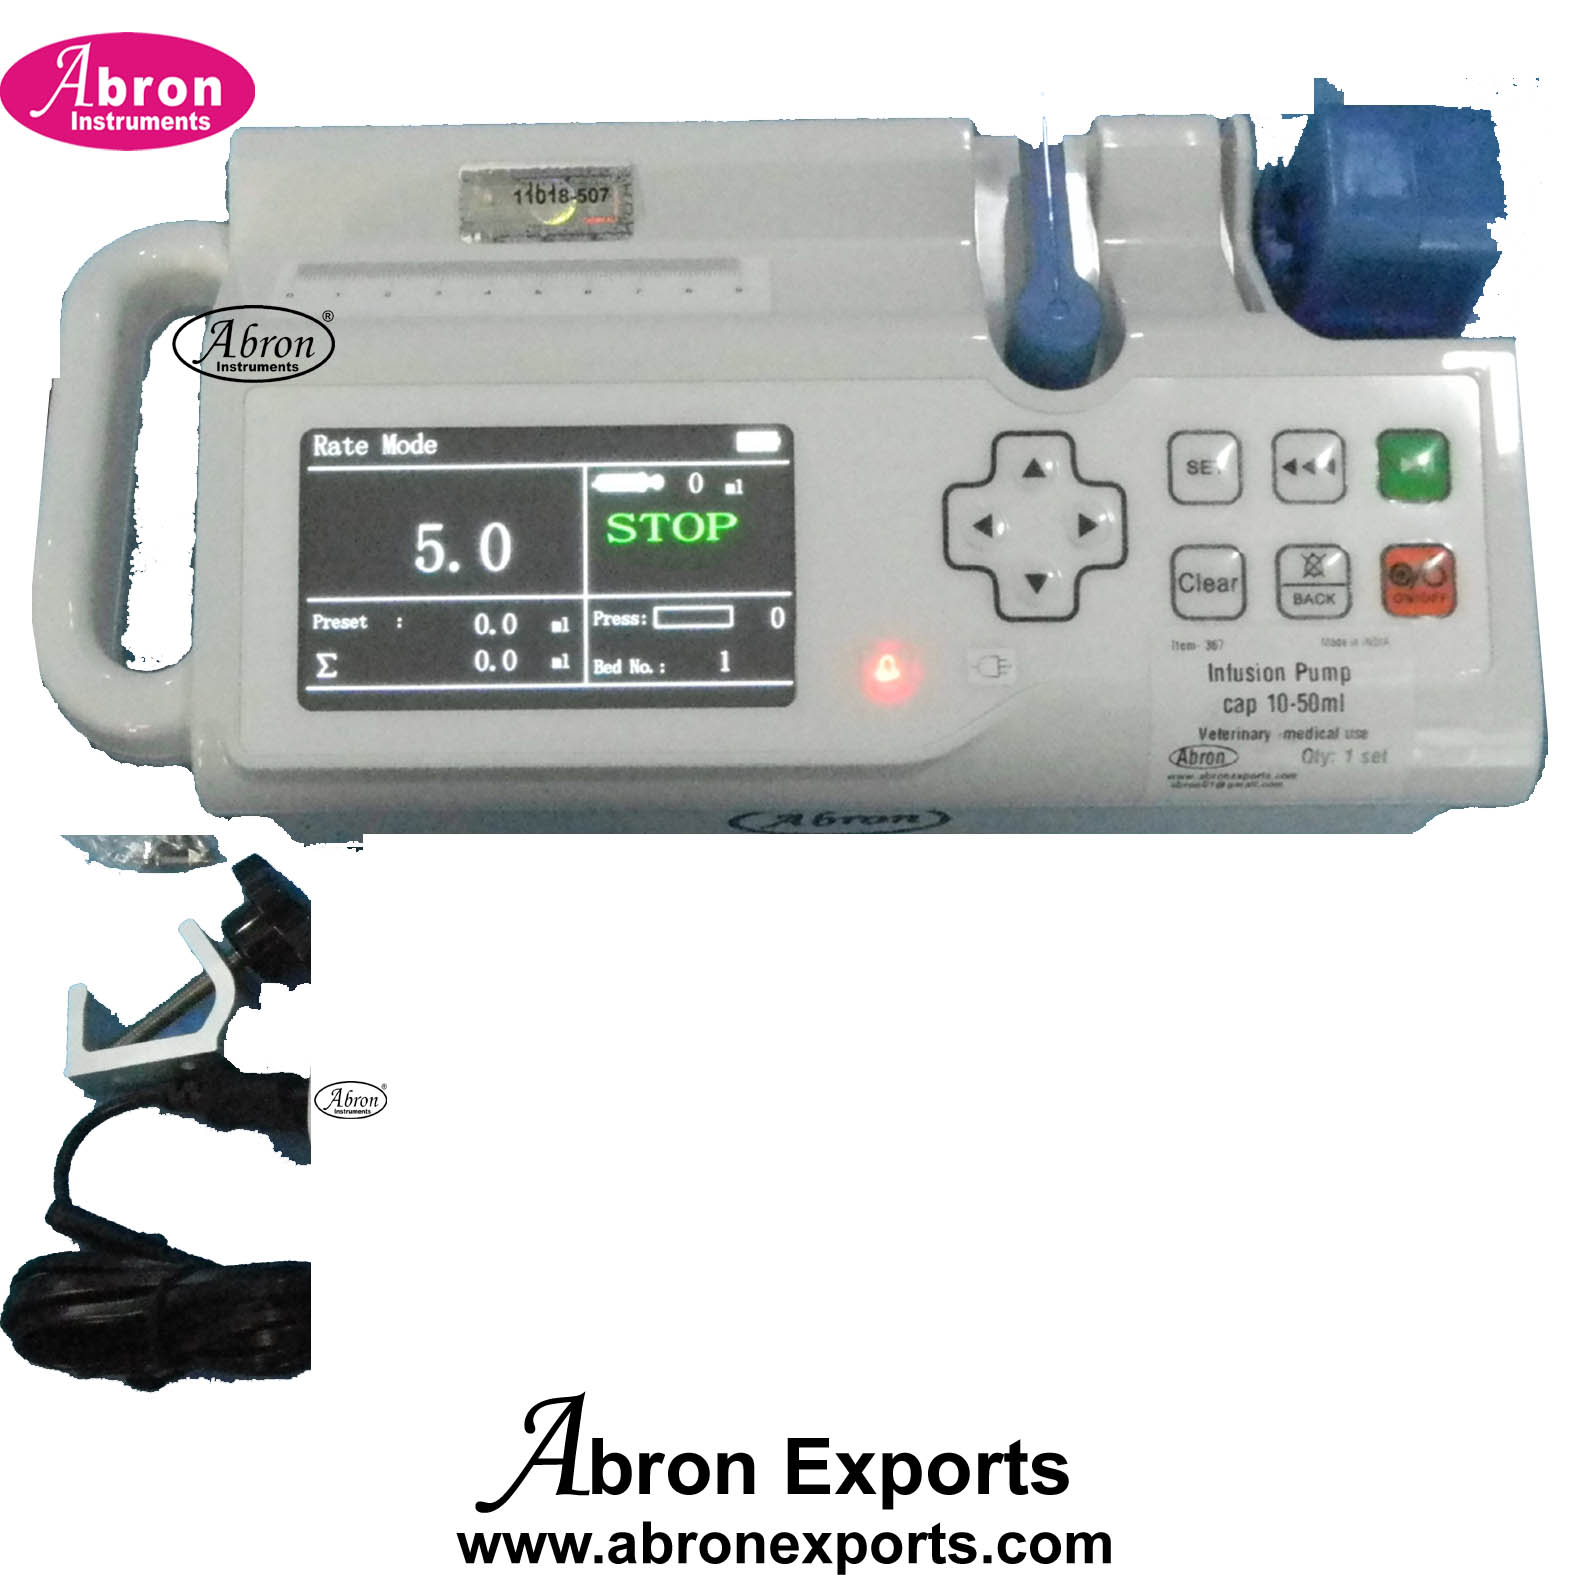 syringe Infusion pump capacity 50ml infusion slowly controlled electronic for medical veterinary use AMB-602-KL